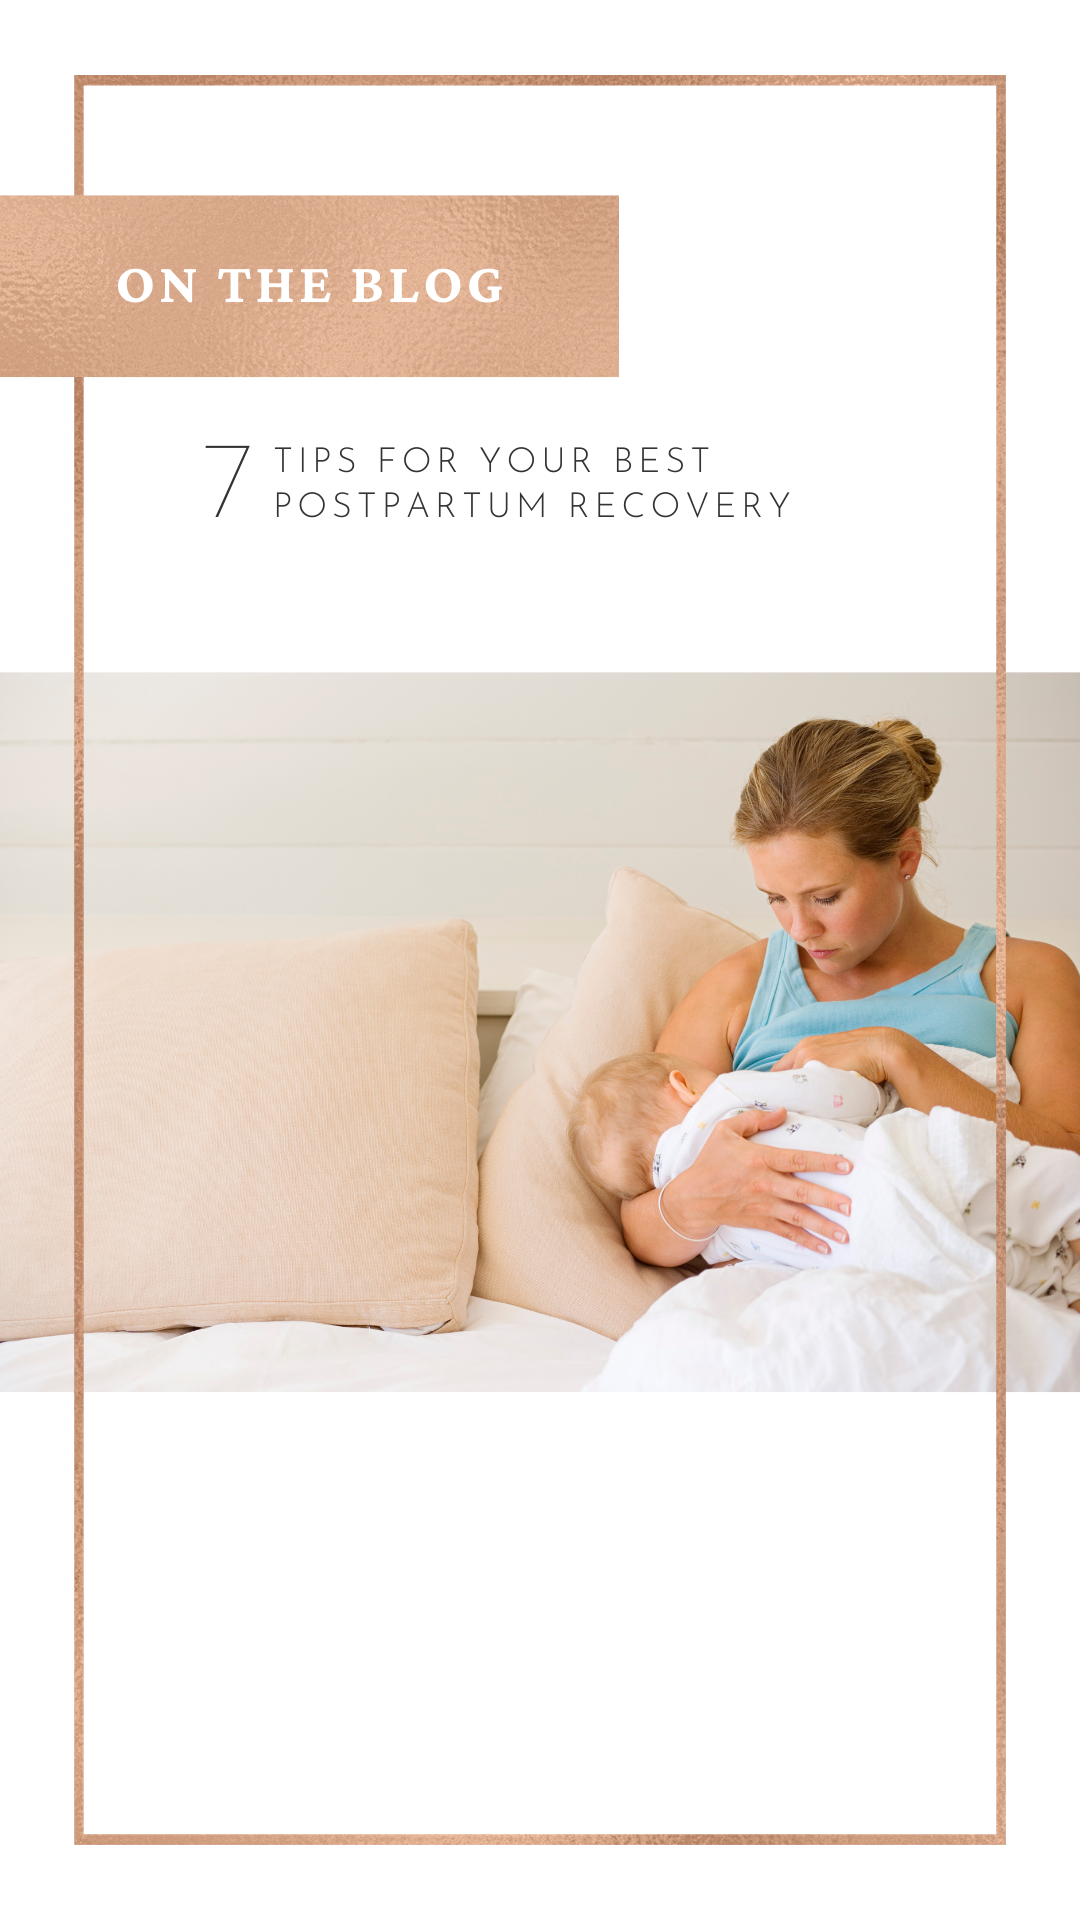 7 Tips for the Best Postpartum Recovery